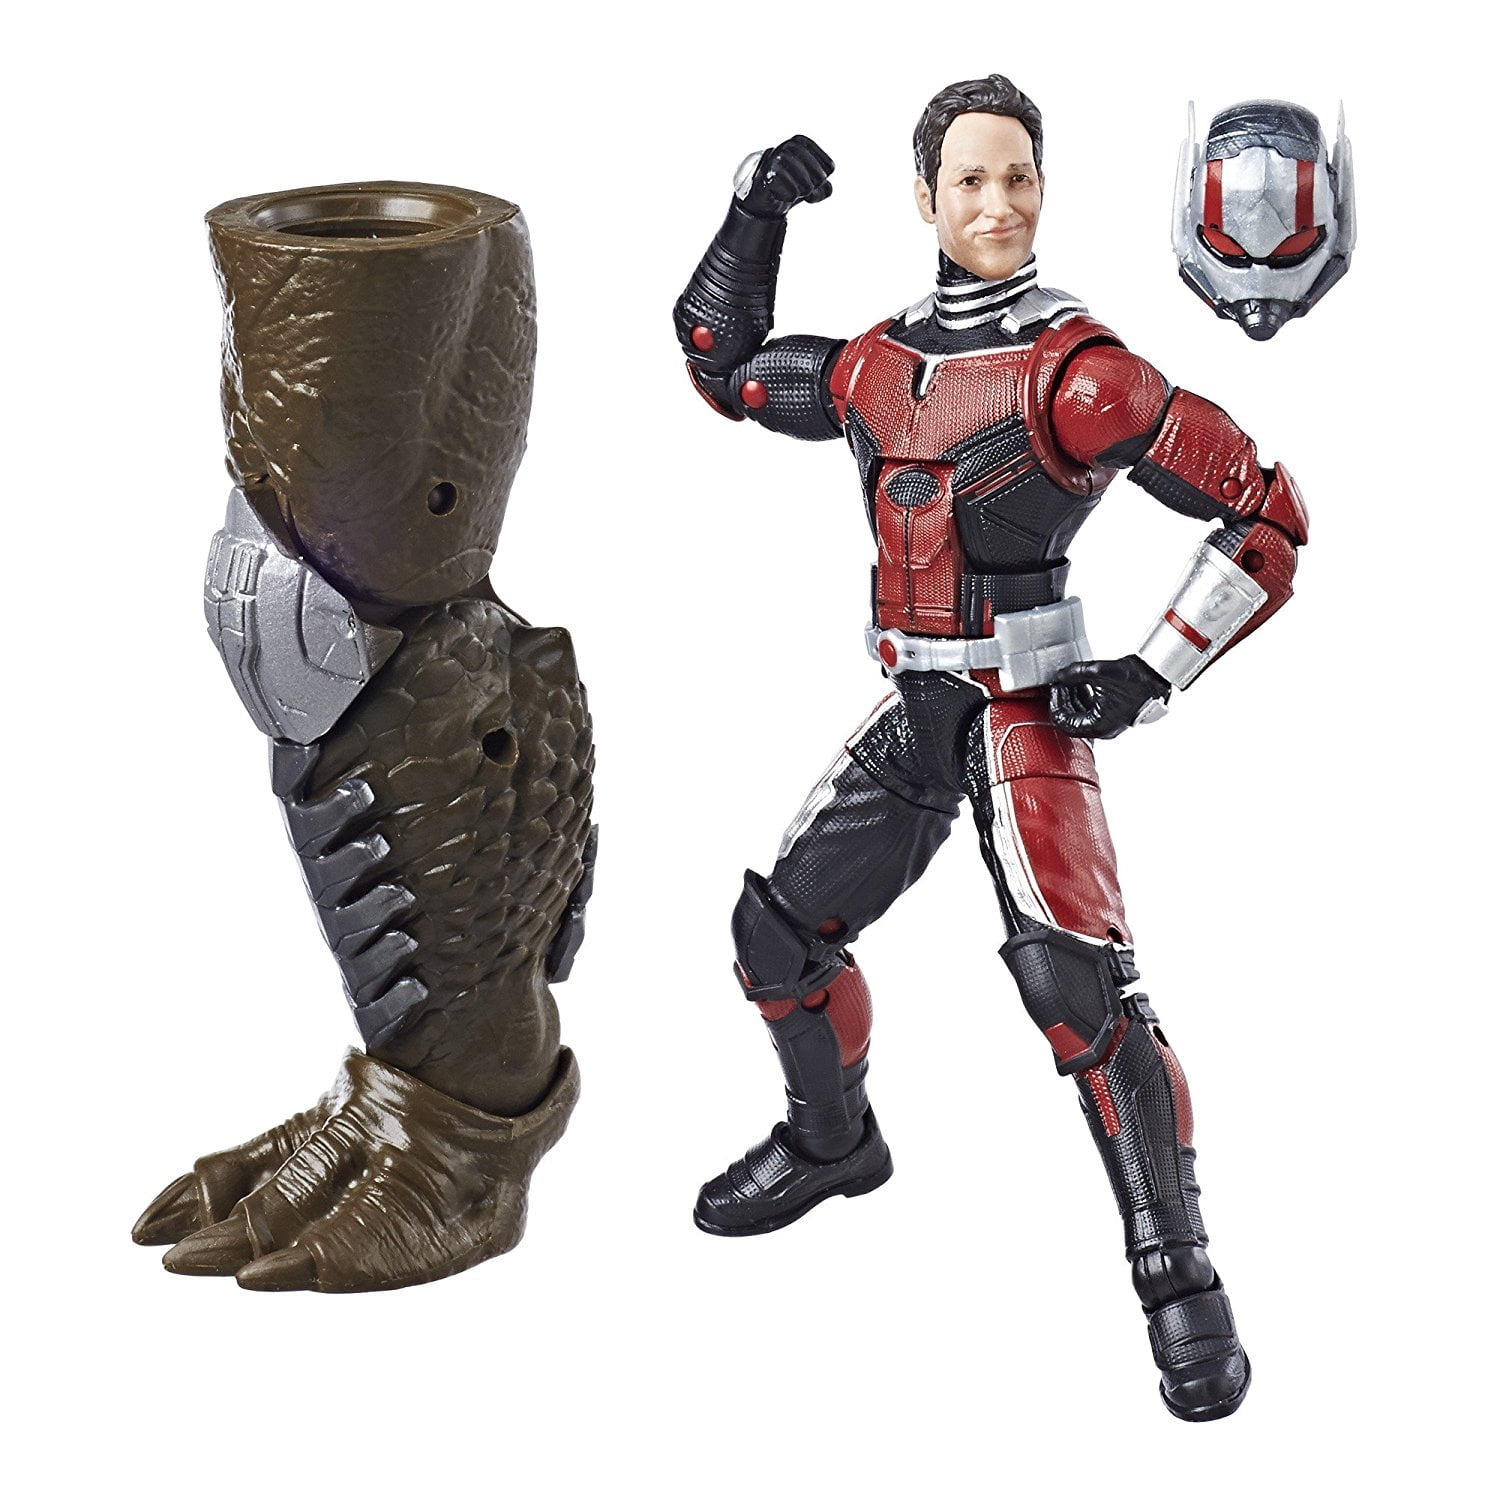 ANT-MAN 6" INCH ca.16 cm FIGURE HASBRO MARVEL LEGENDS ANT-MAN AND THE WASP 